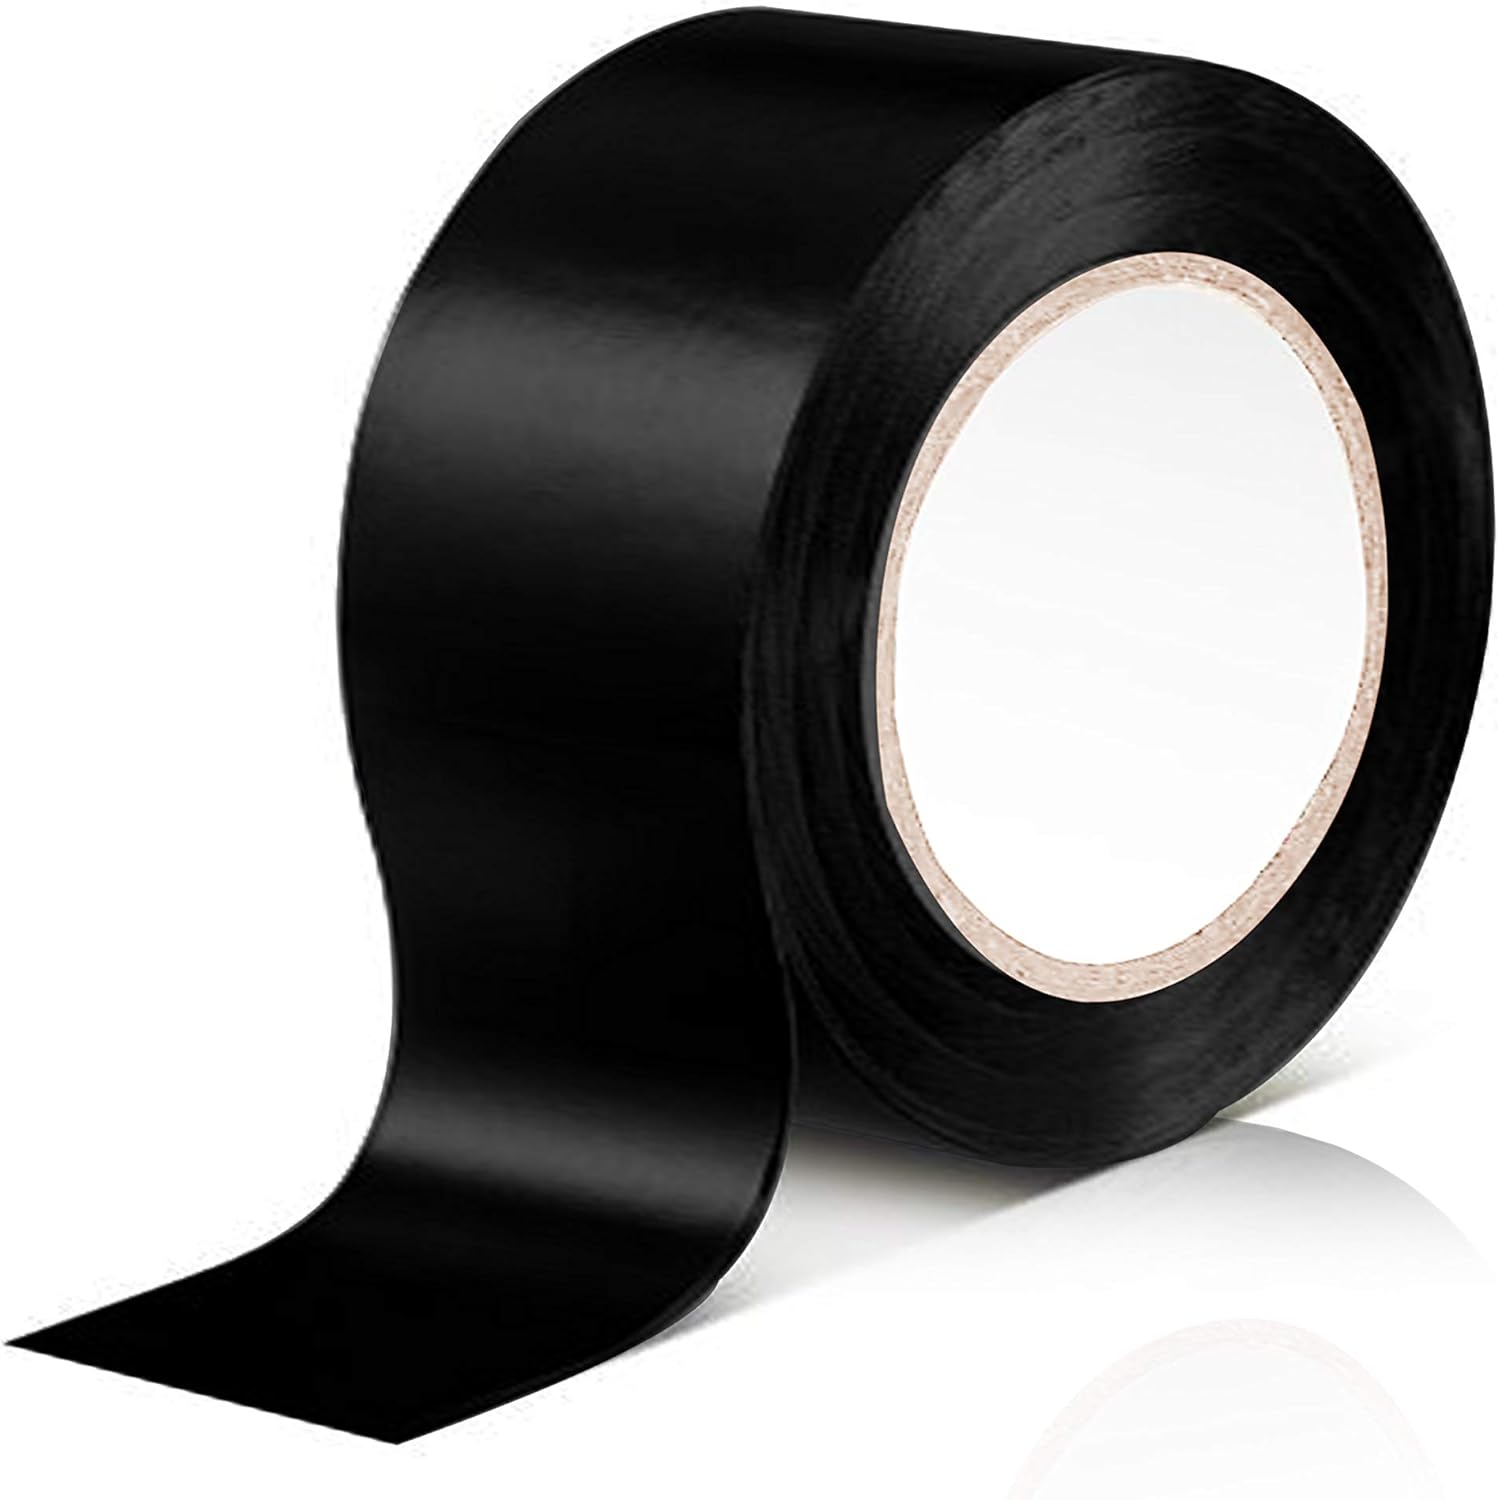 ADHES Electrical Tape Black Electrical Tape Strong Adhesive 0.75inch by 65.6feet Pack of 5Rolls